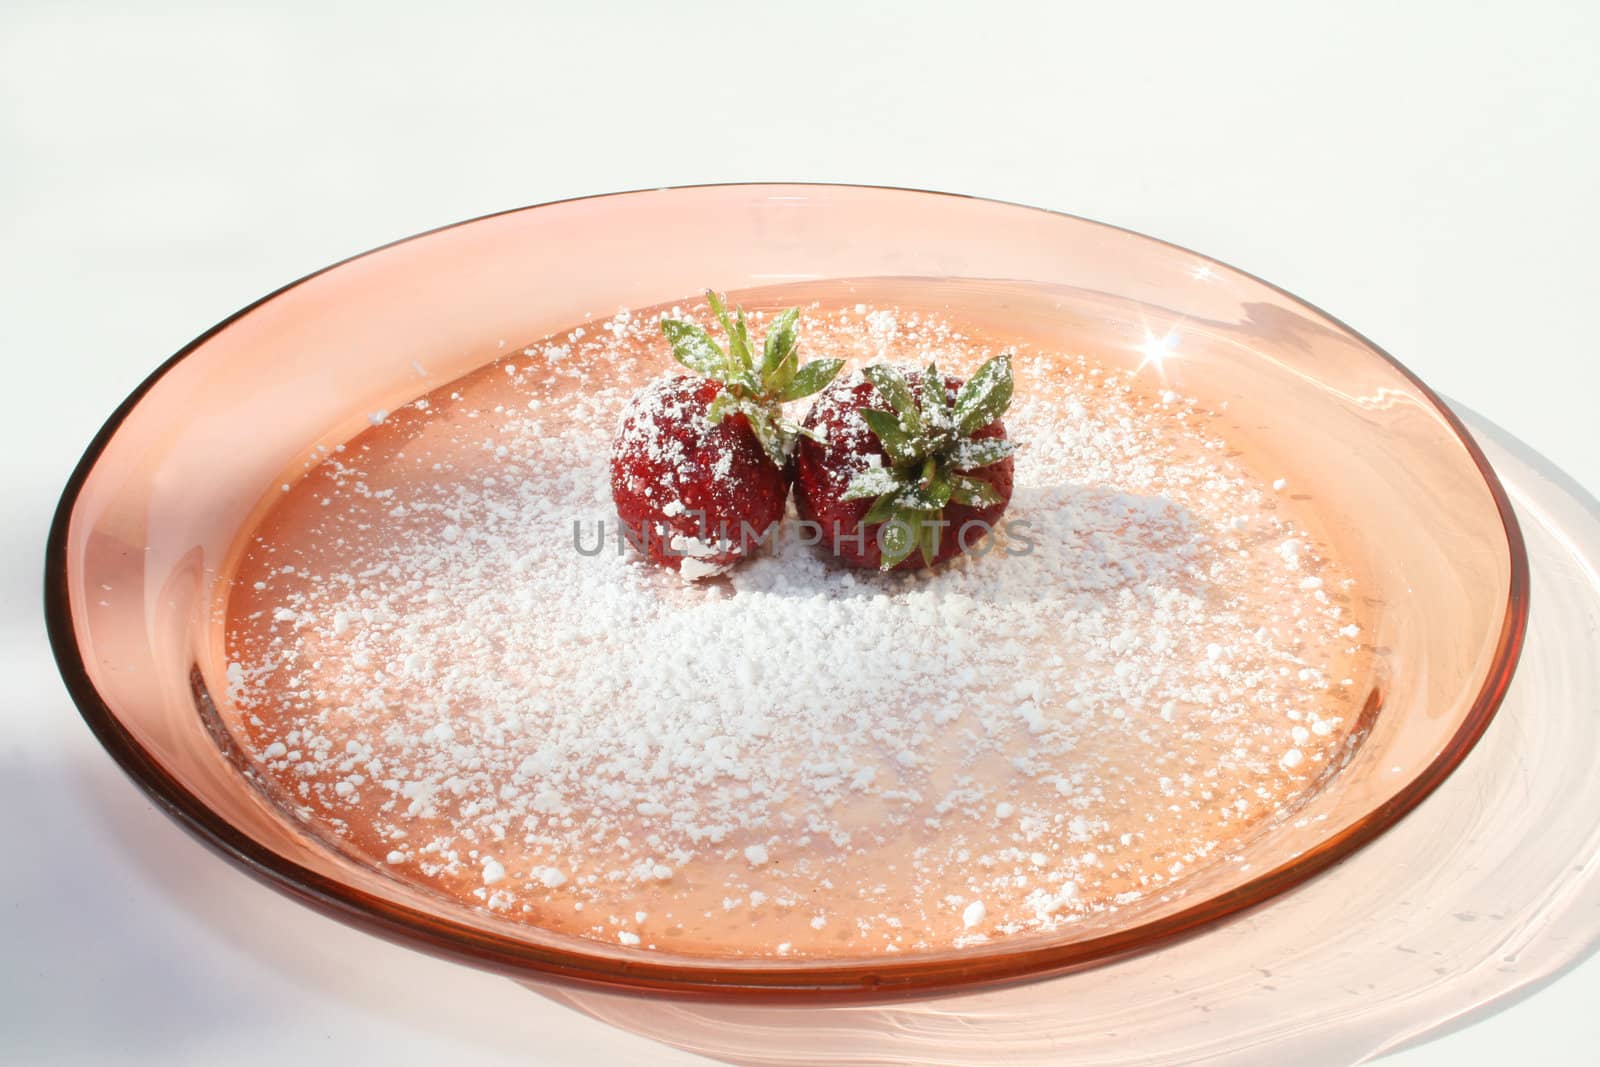 Two strawberries with powdered sugar on pink plate against a white background